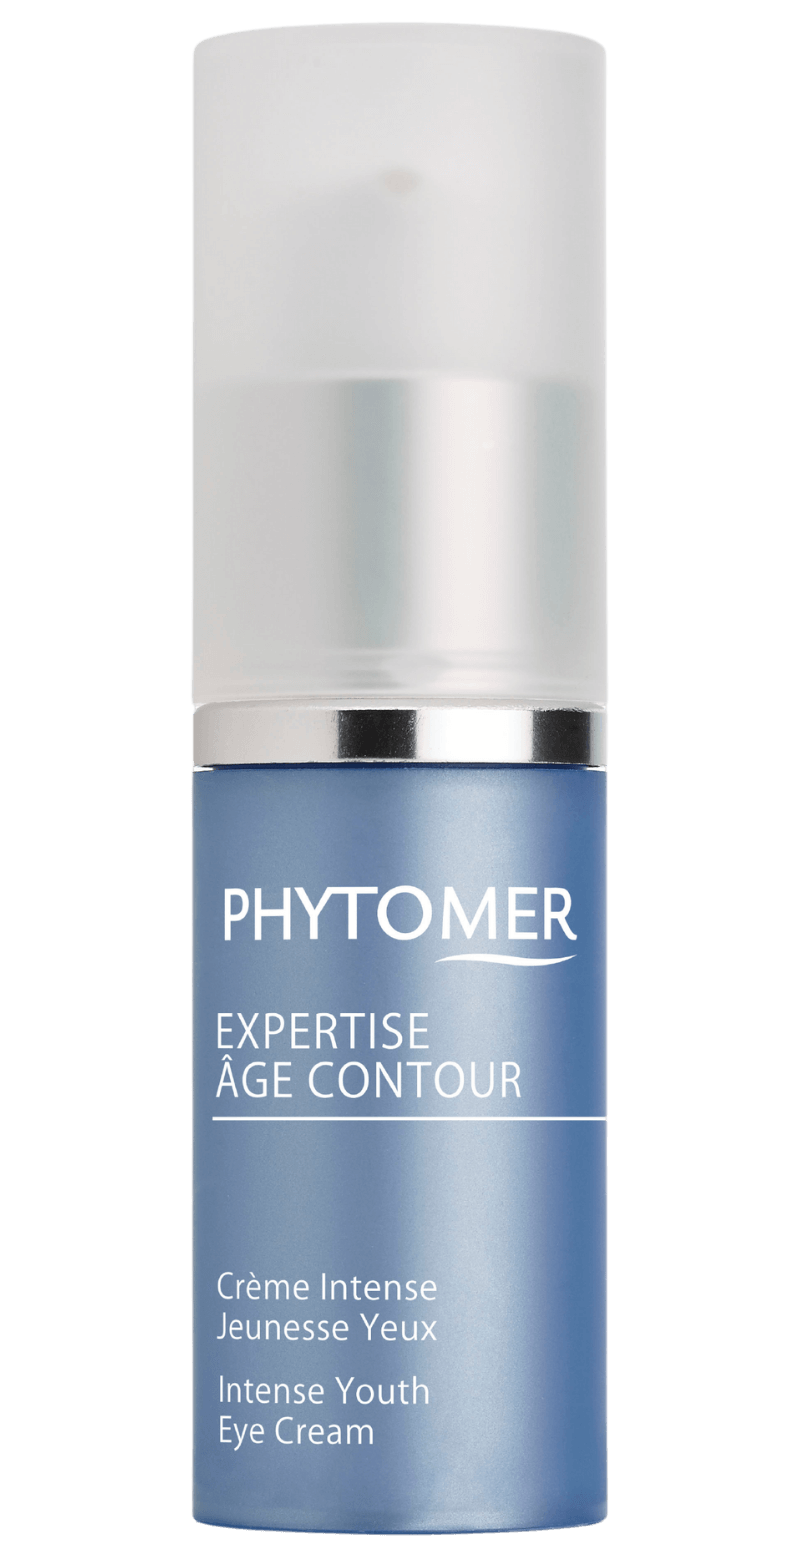 's Phytomer EXPERTISE AGE CONTOUR Intense Youth Eye Cream - Bellini's Skin and Parfumerie 